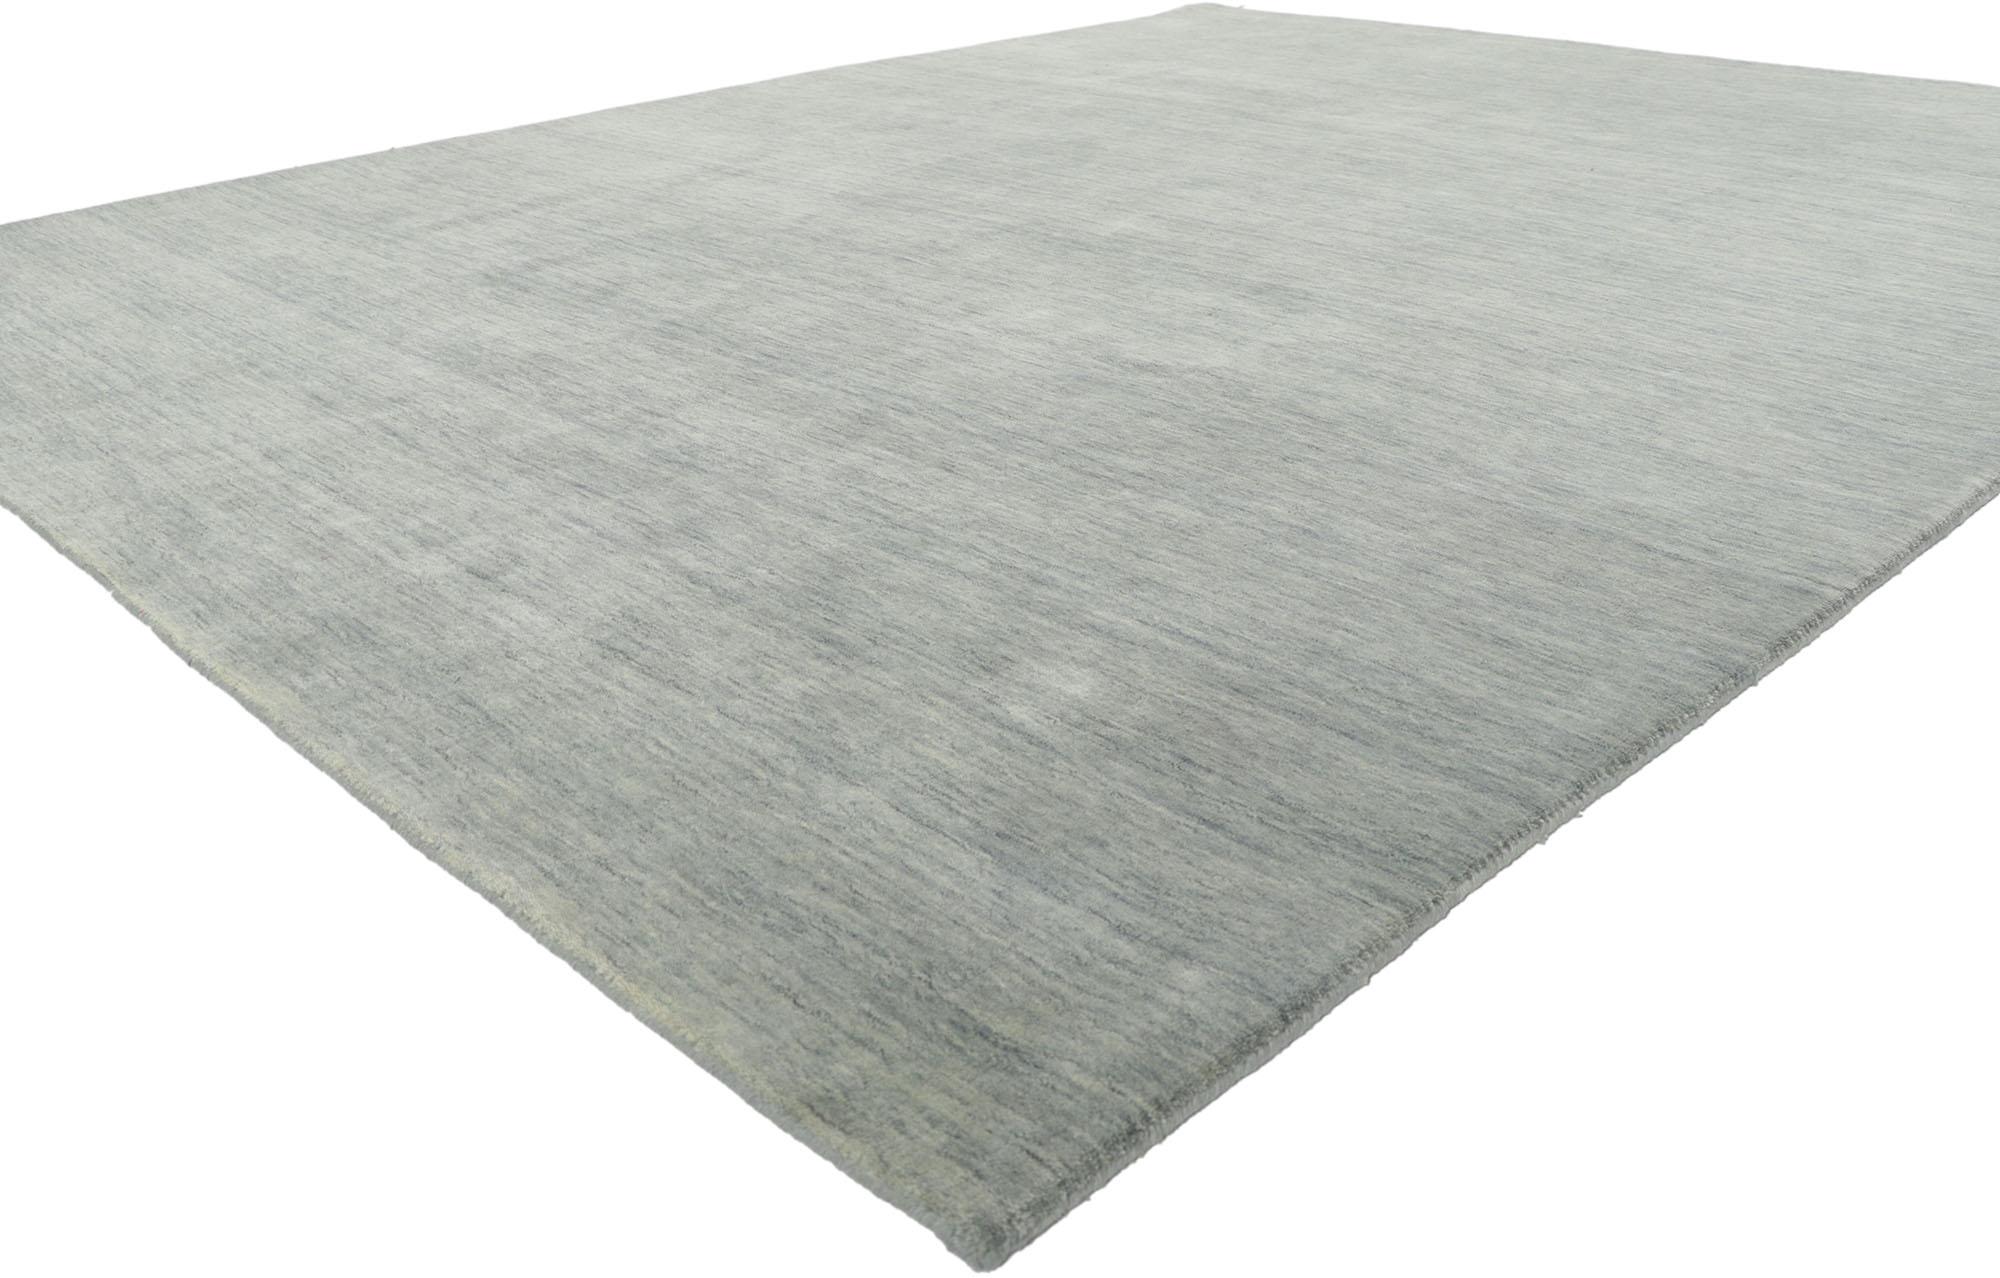 30741 New Contemporary grey area rug with Modern Style 08'01 x 10'00. Effortless beauty combined with simplicity and modern style, this hand-loom wool contemporary Indian rug provides a feeling of cozy contentment without the clutter. Imbued with